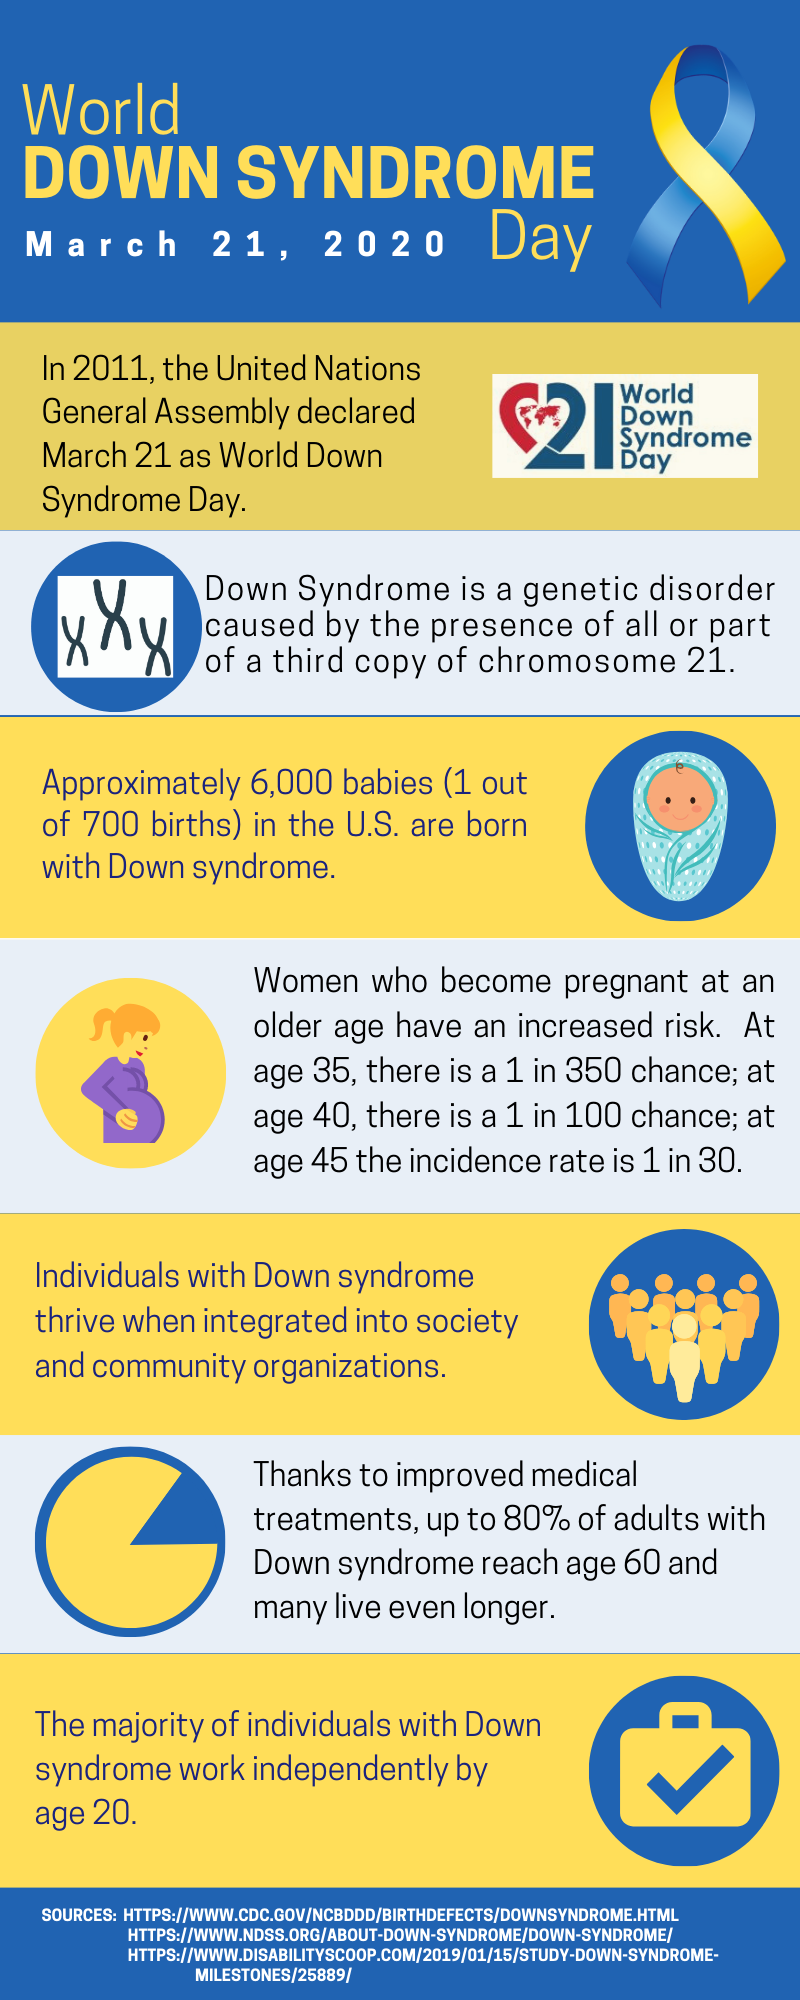 Down Syndrome: Facts, Statistics, and You